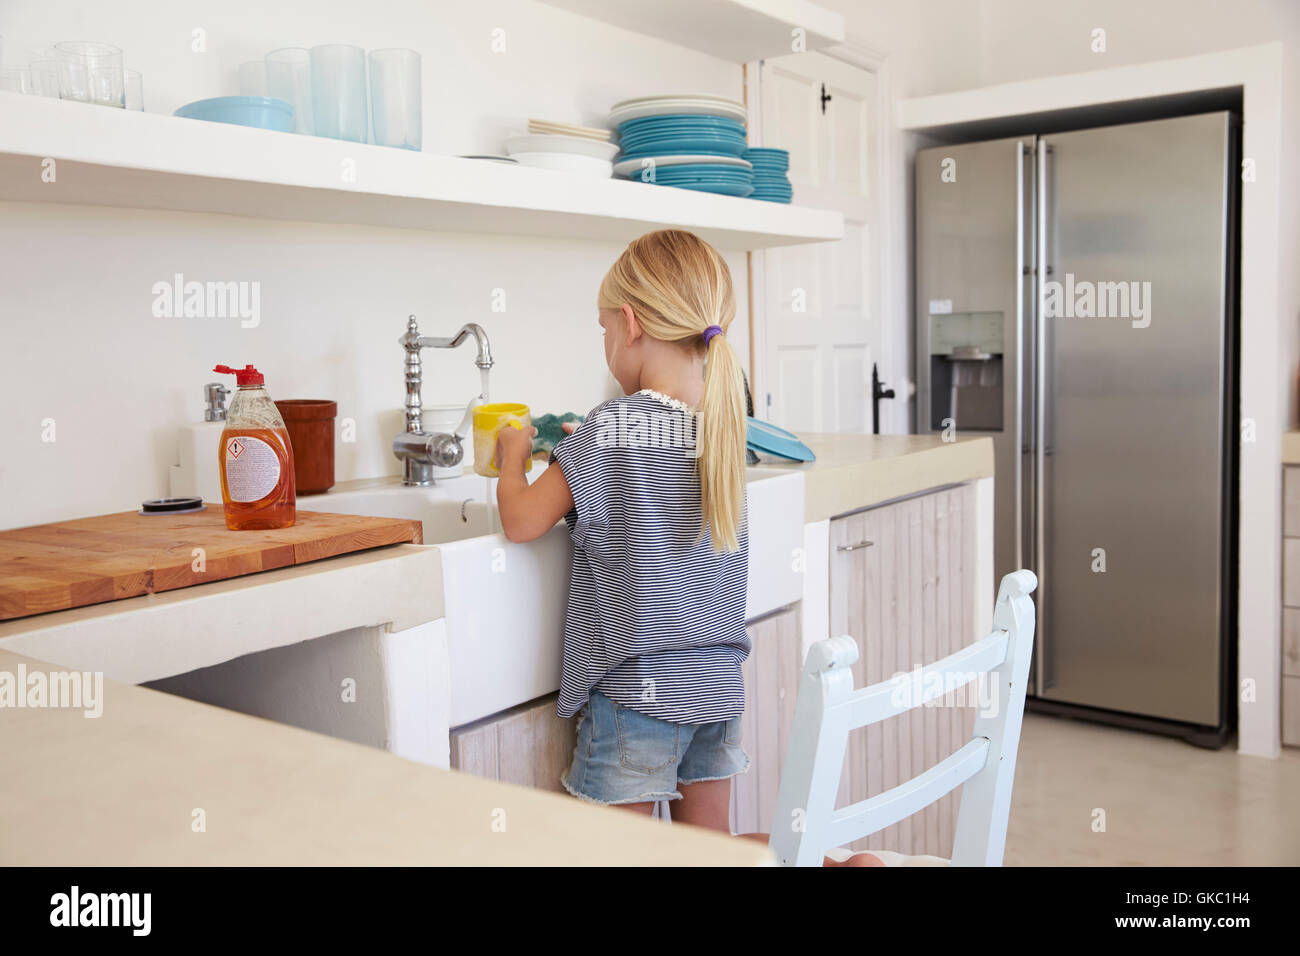 Young girl kneeling on chair washing up, back view Stock Photo